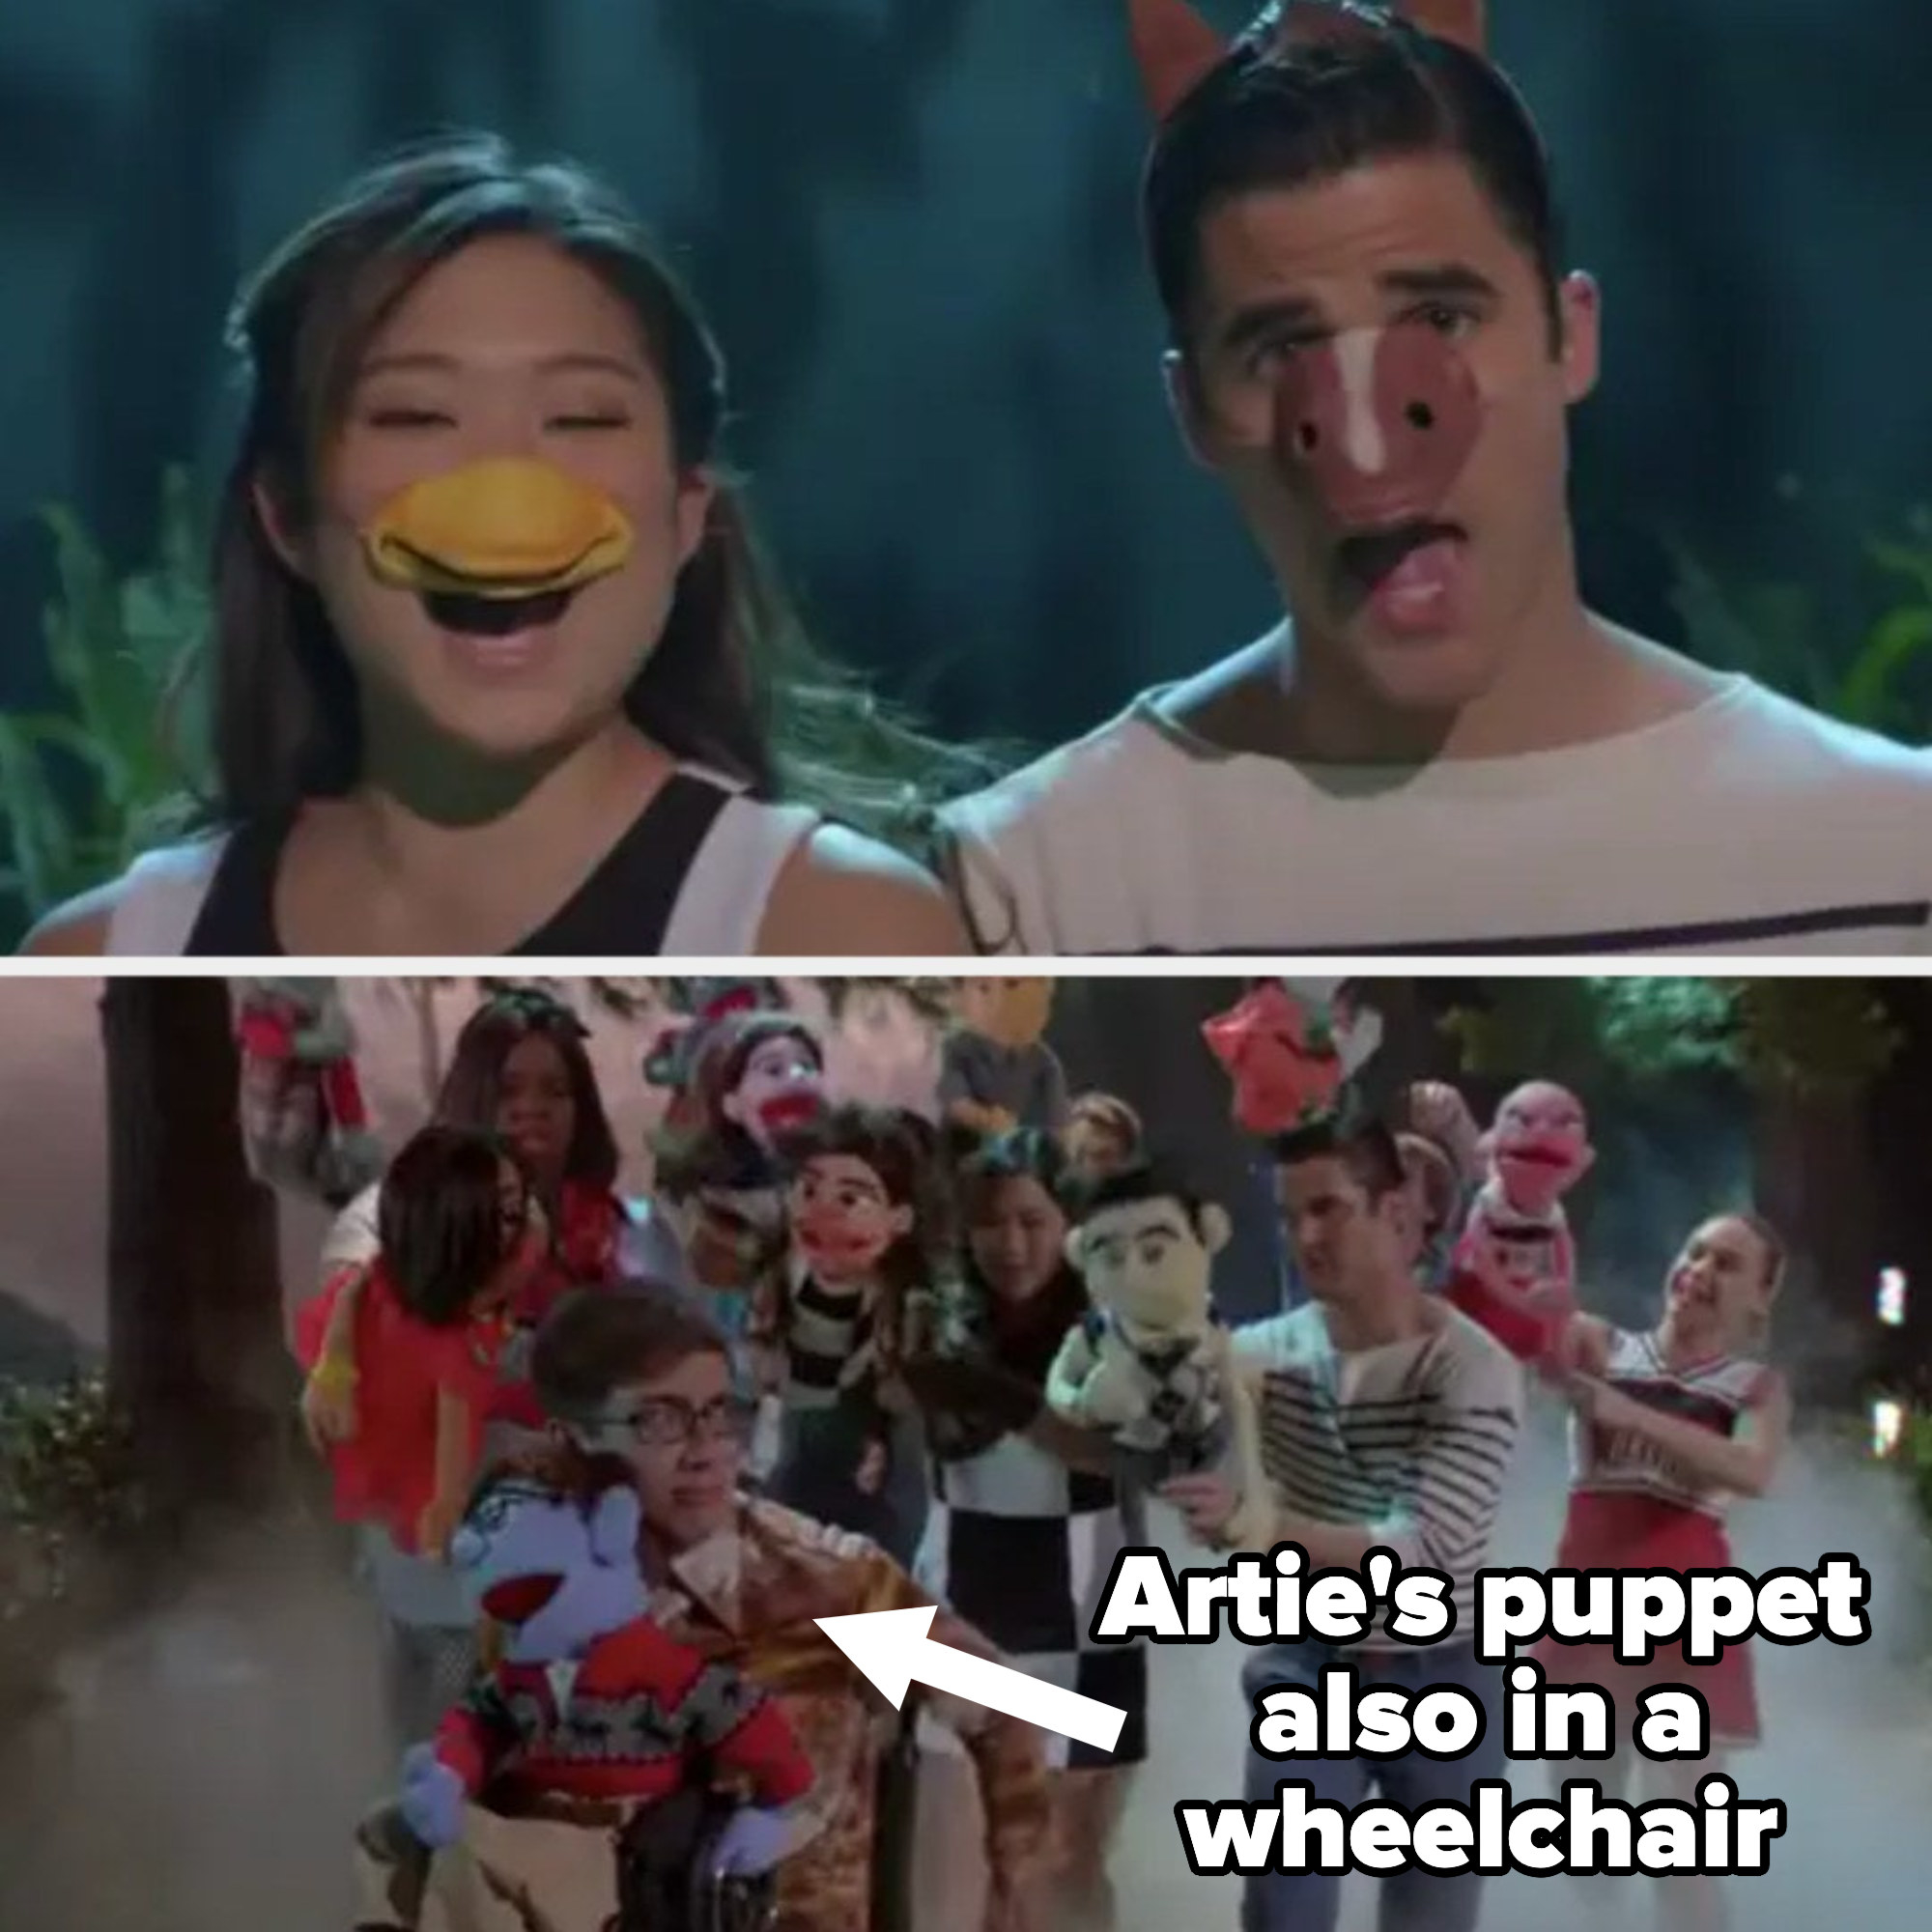 Tina and Blaine with animal noses on then everyone with puppets chasing Artie and his puppet, who is also in a wheelchair